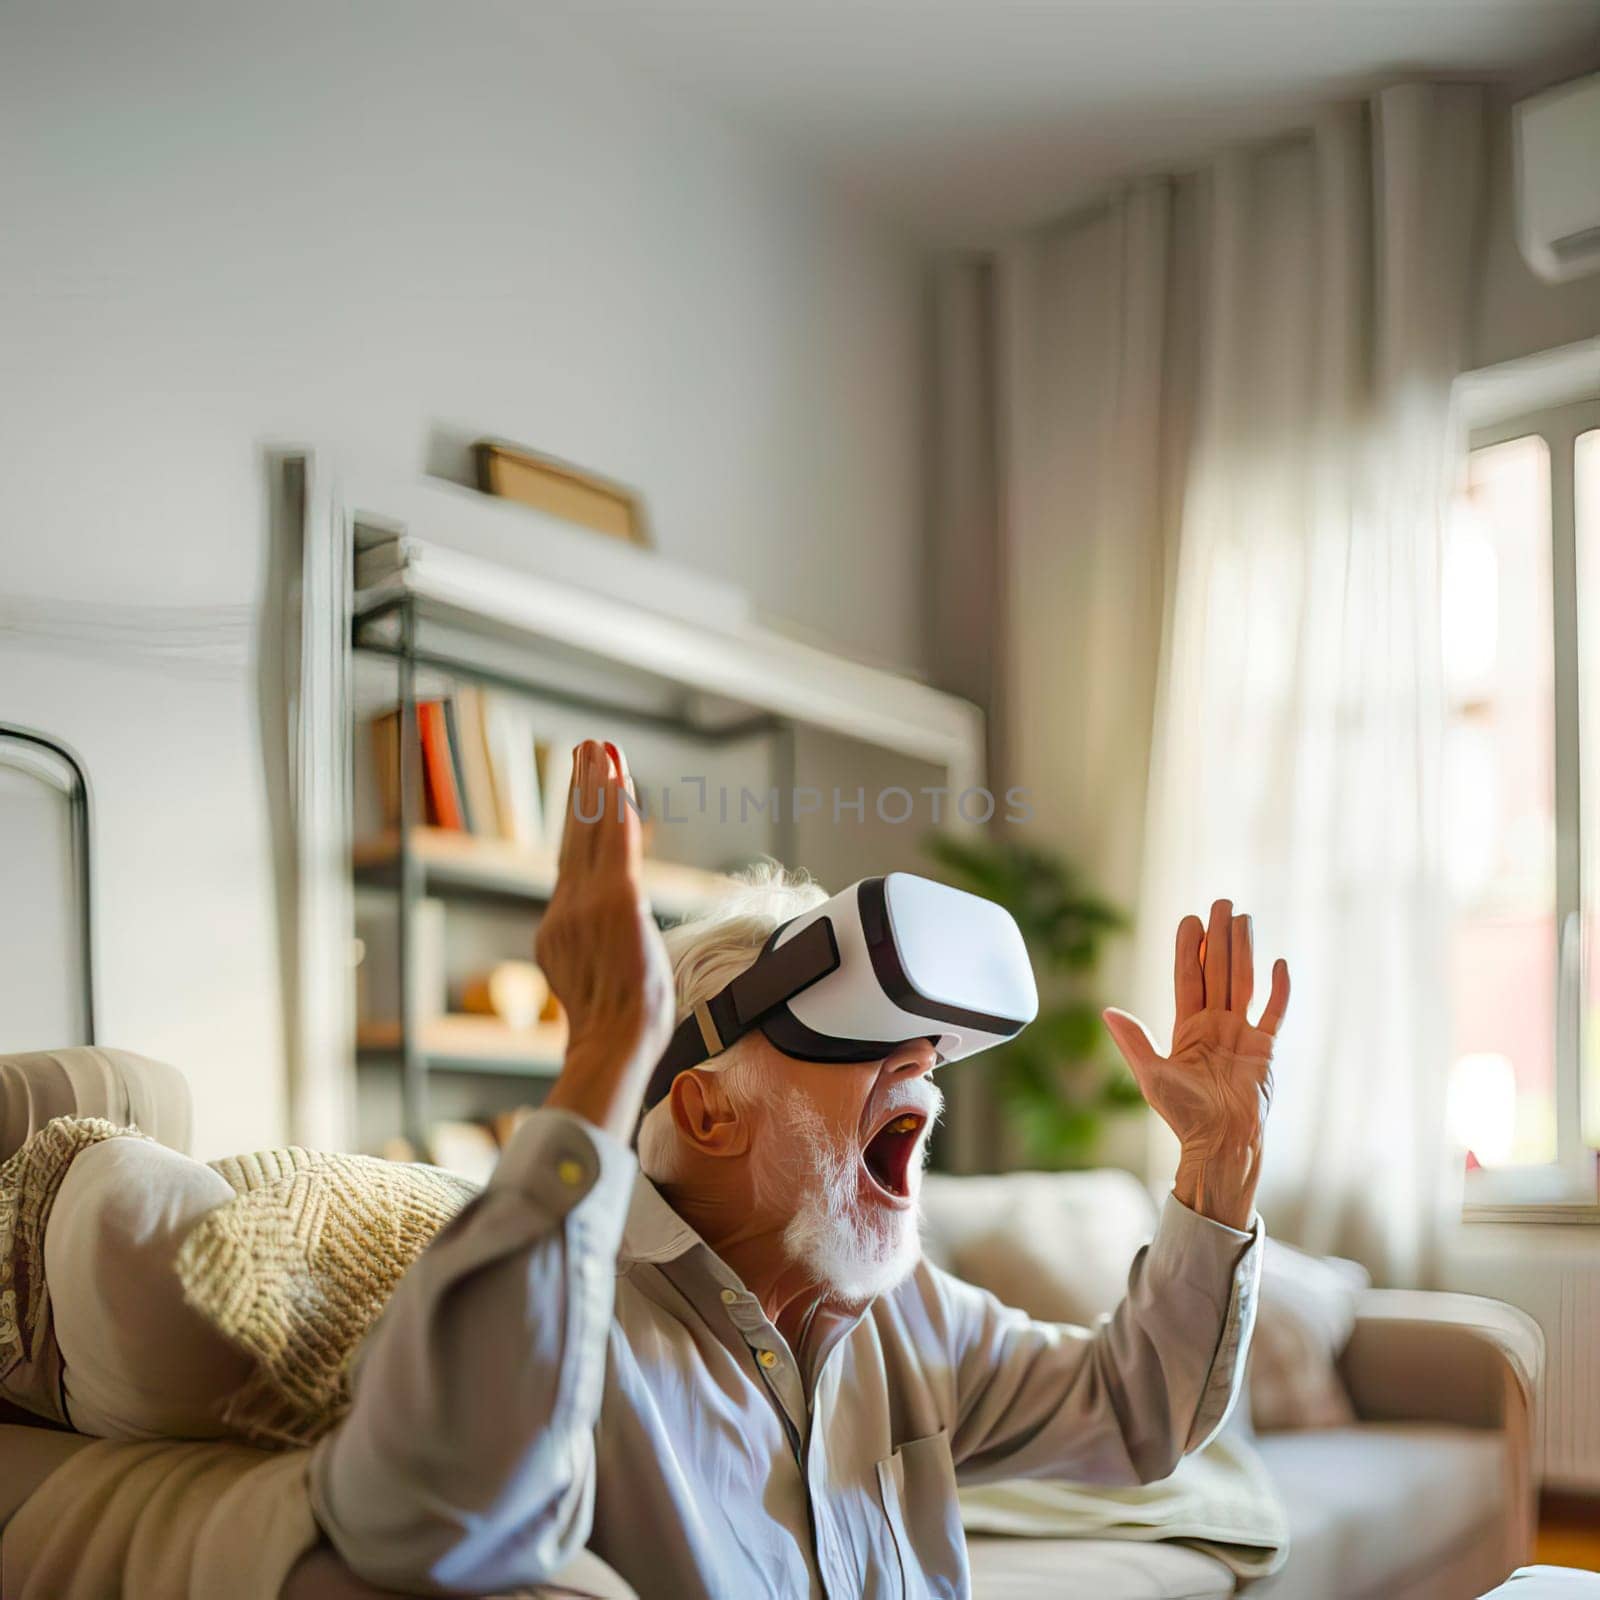 An older man is engaged in virtual reality, yelling while experiencing the digital environment through a headset.